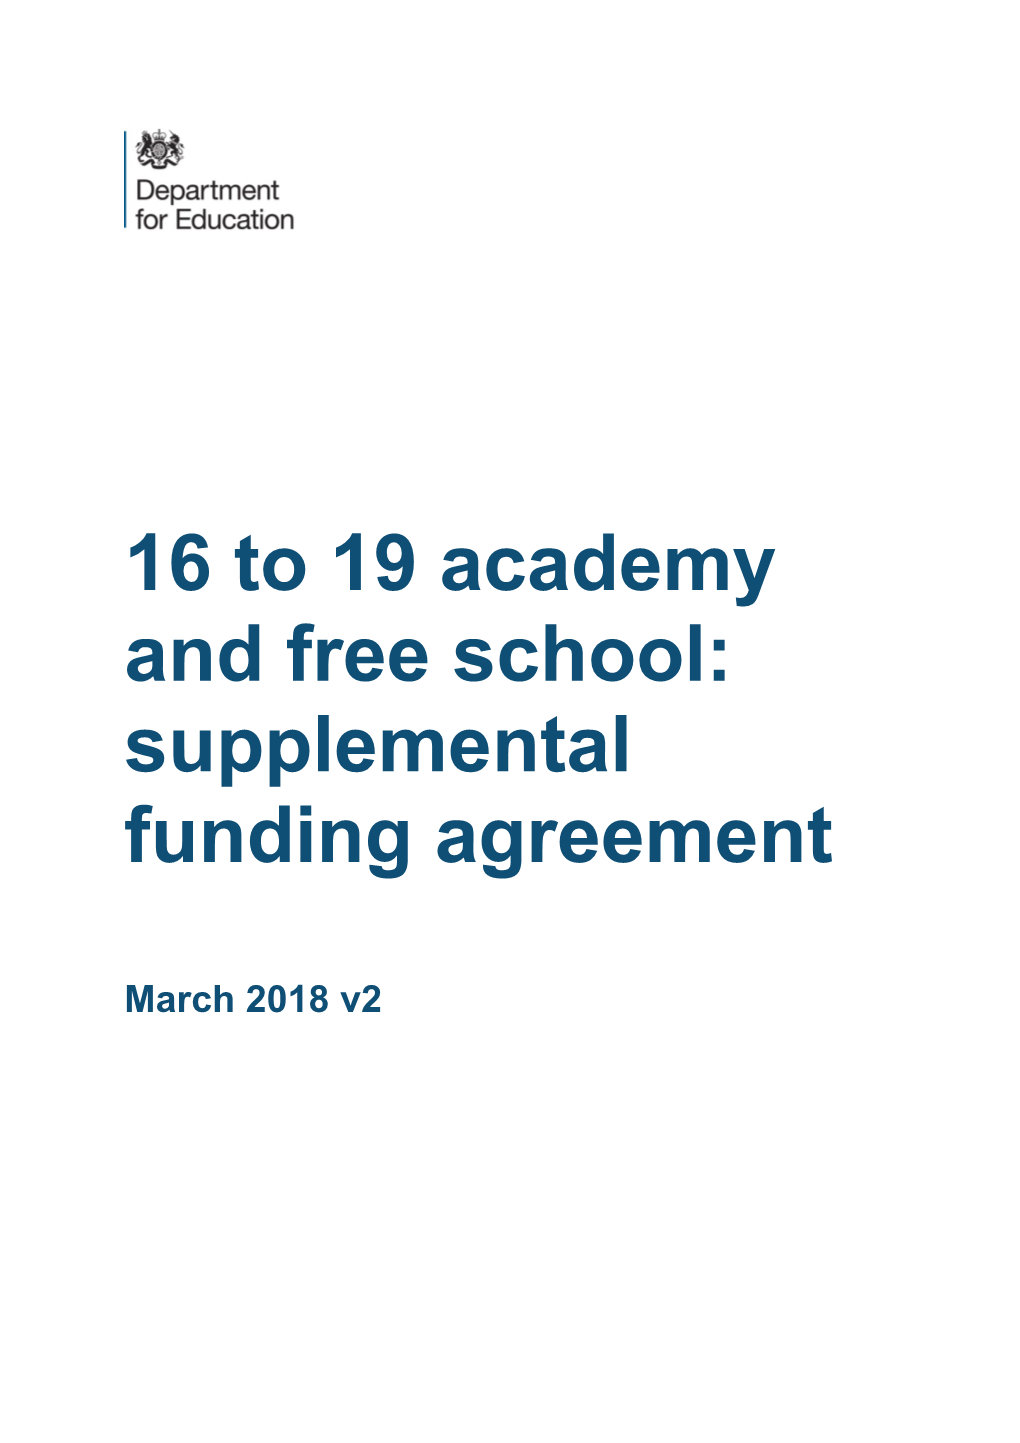 16 to 19 Academy and Free School: Supplemental Funding Agreement March 18 V2